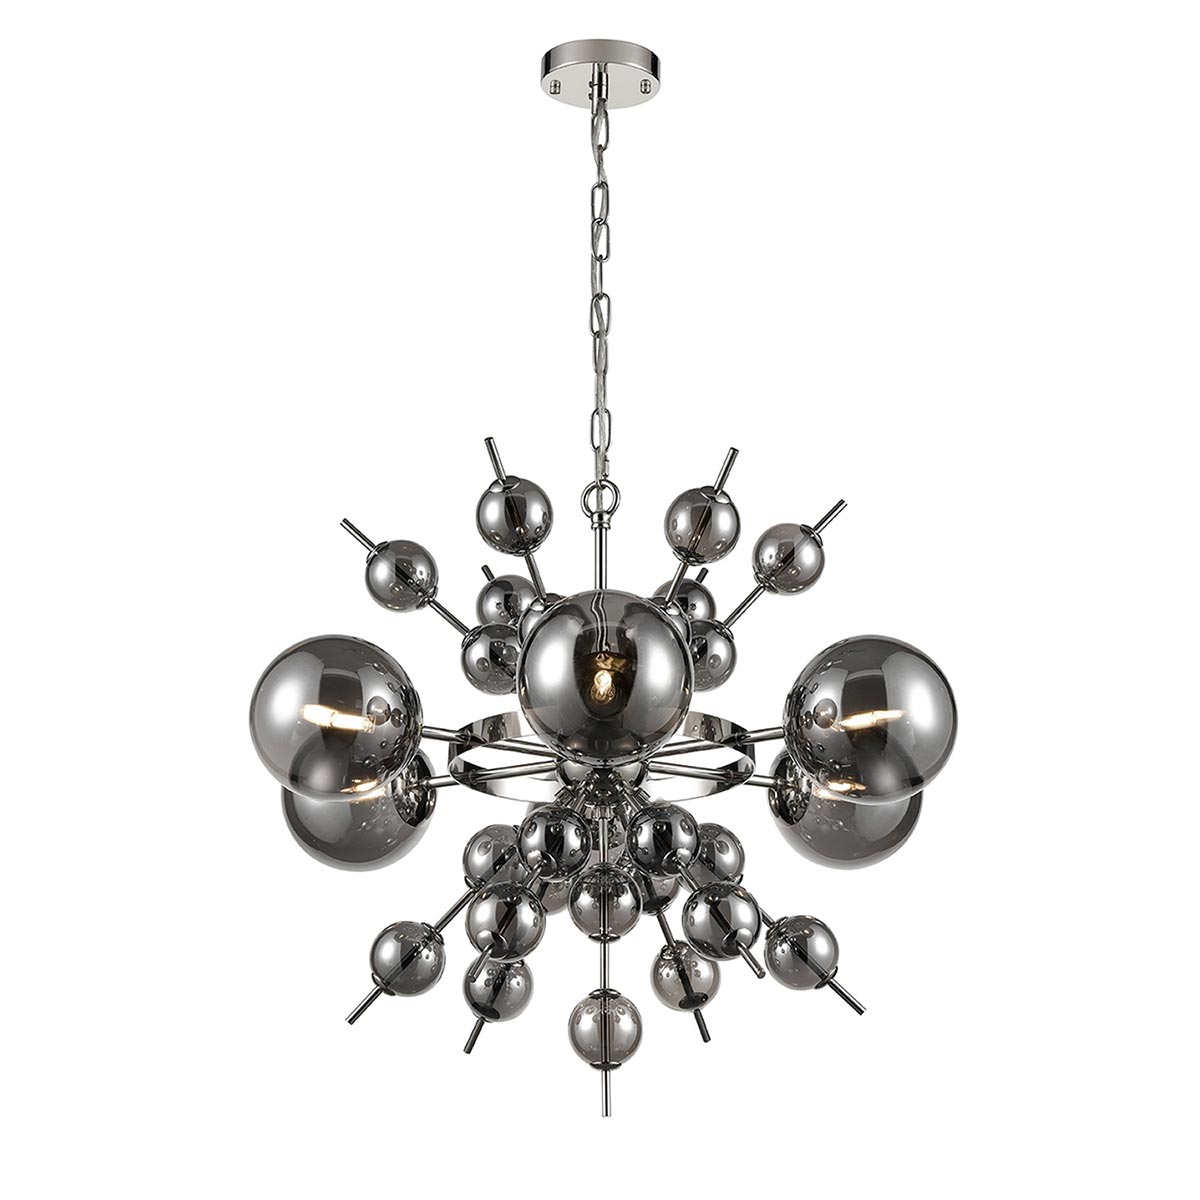 Modern 6 Light Chandelier In Chrome With Smoked Glass Globes